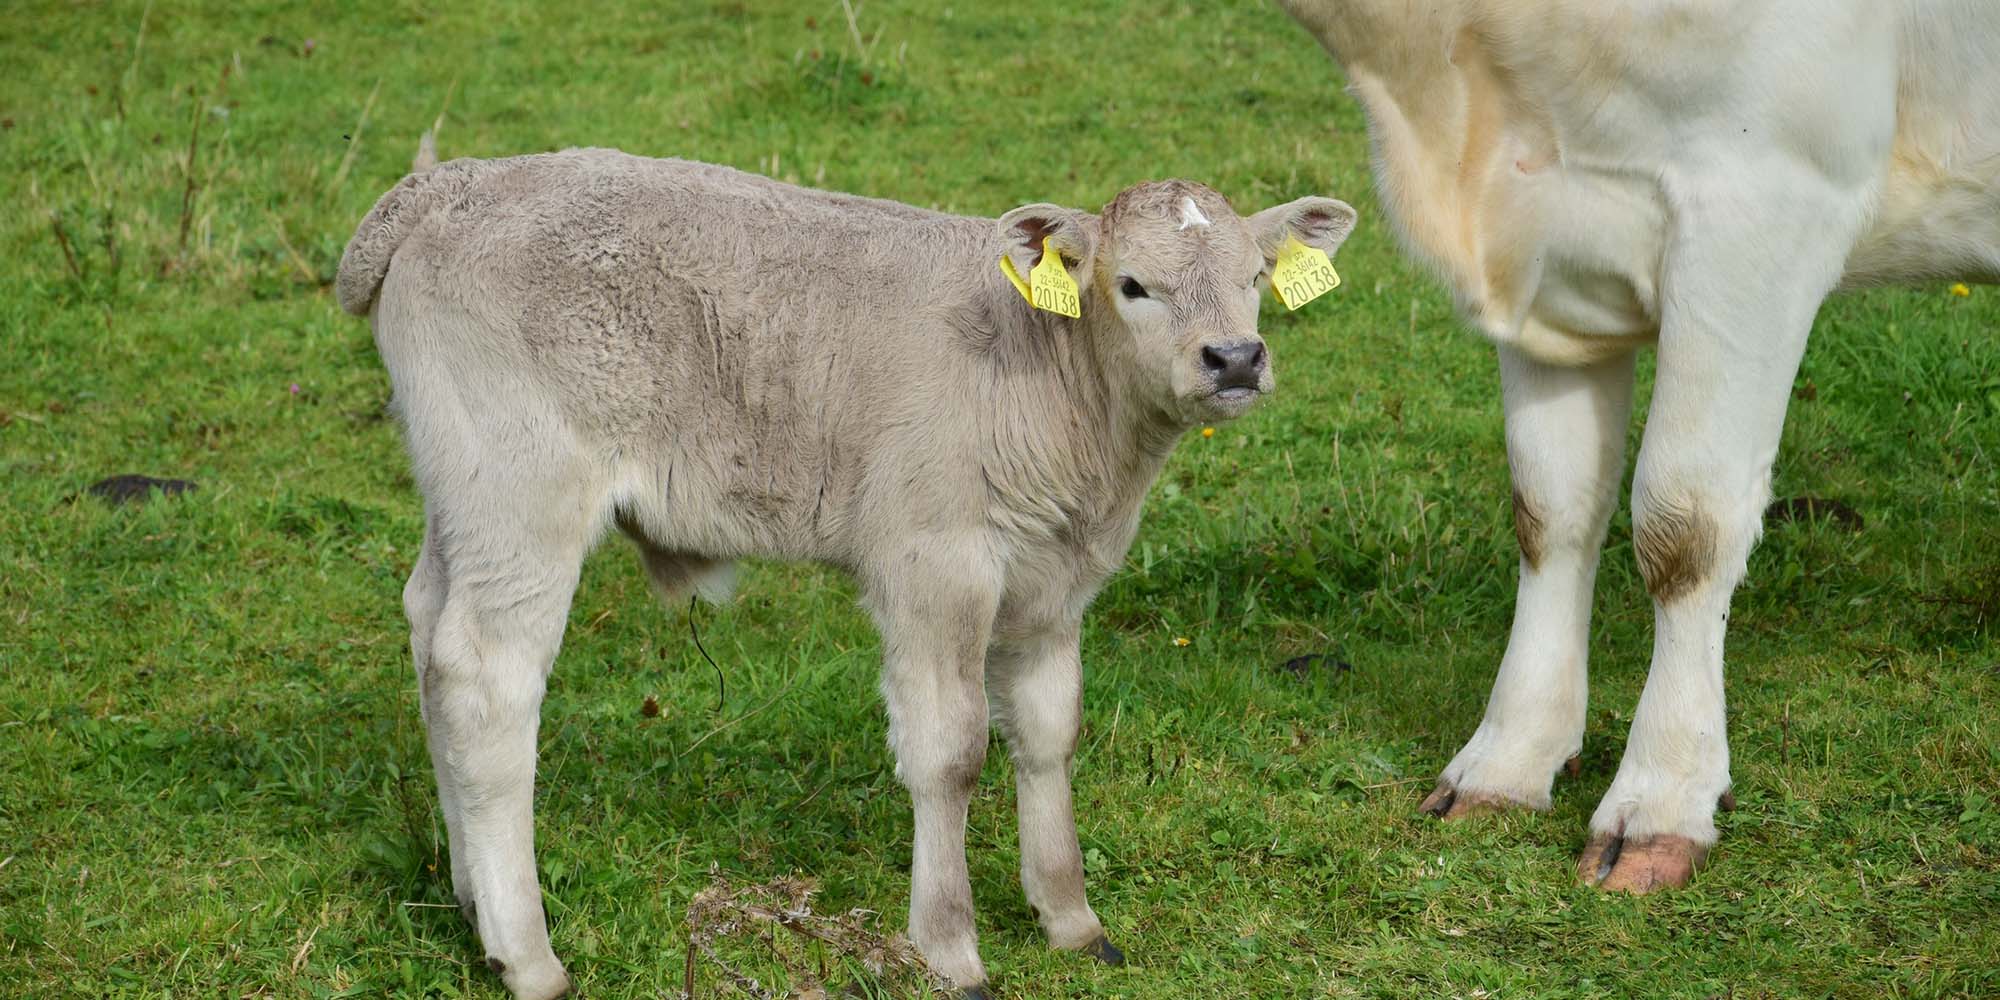 A young calf in Ireland